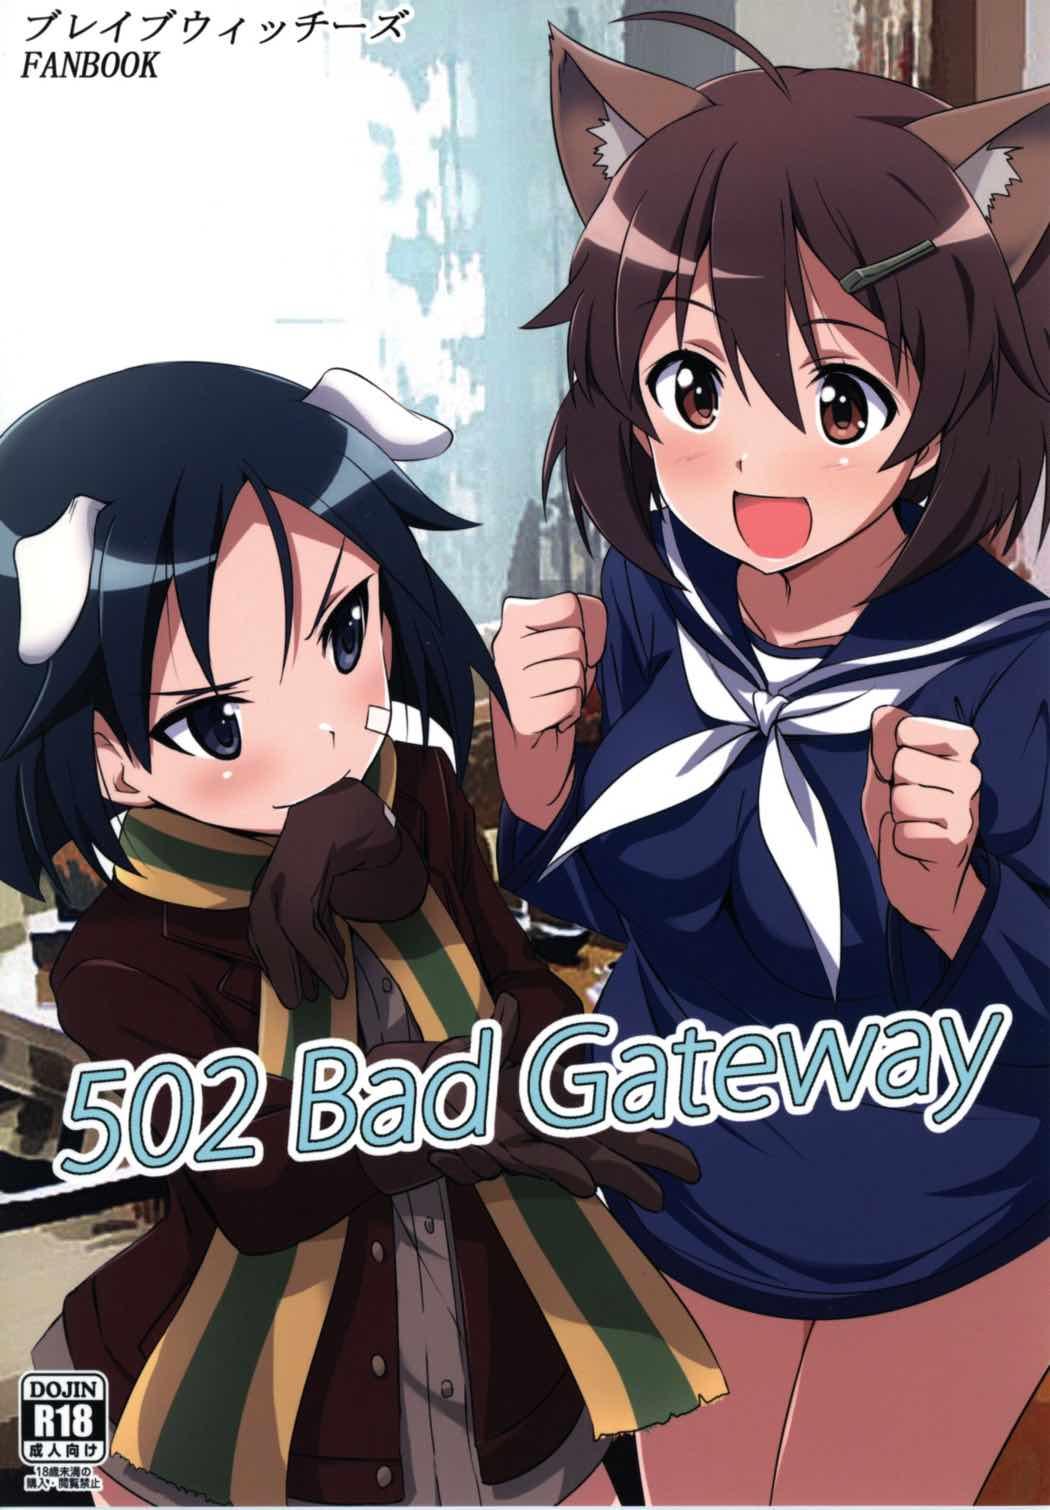 Lick 502 Bad Gateway - Brave witches Porn - Page 1